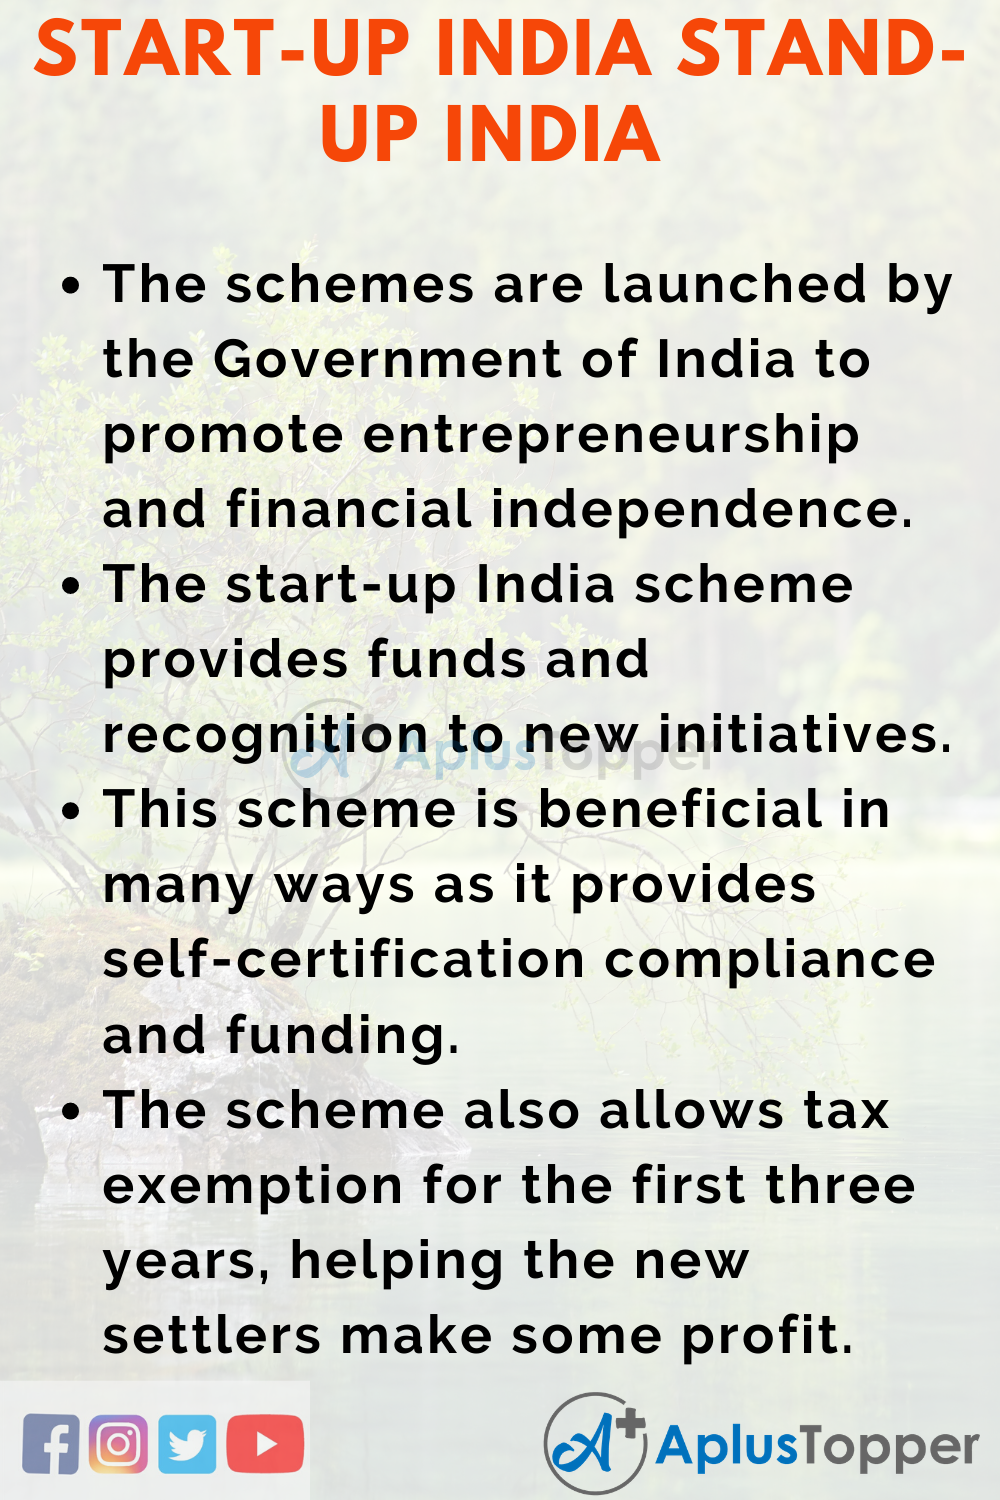 Essay about Start-Up India Stand-Up India